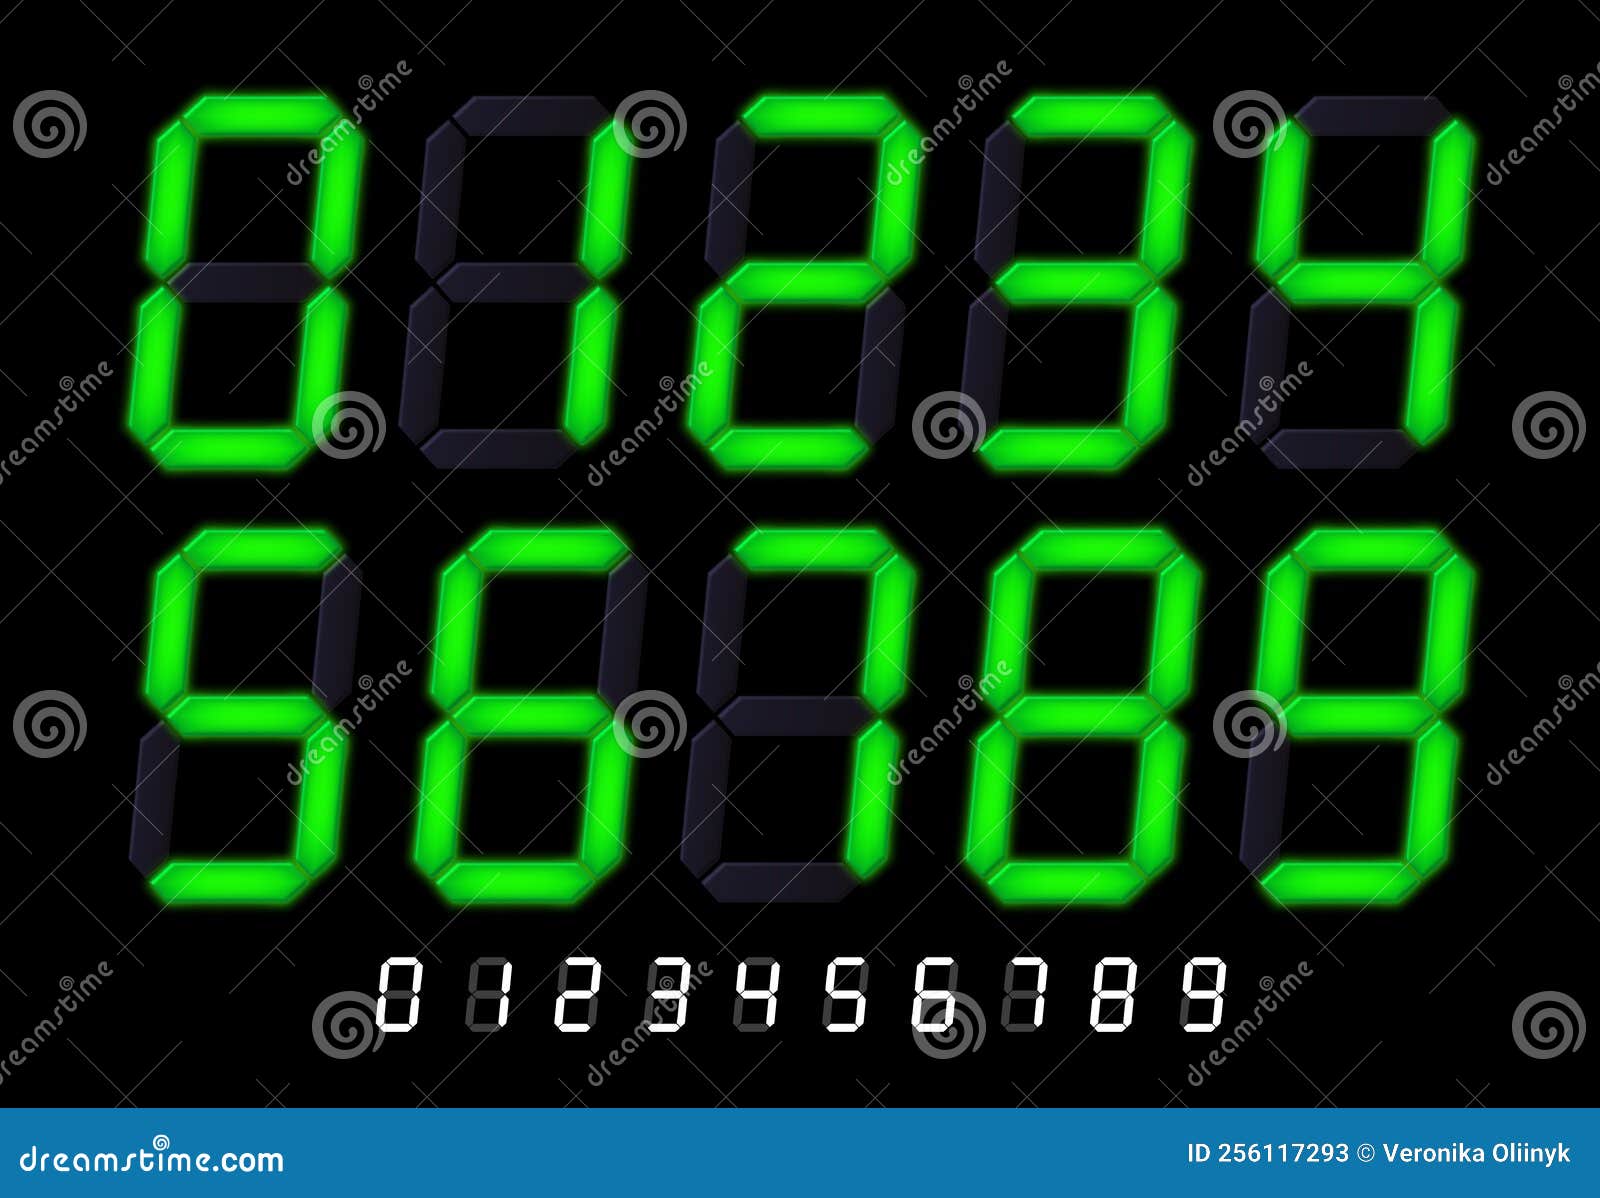 https://thumbs.dreamstime.com/z/segmented-lcd-display-numbers-digital-time-timer-signs-tech-clock-count-retro-led-calculator-screen-font-vector-set-number-256117293.jpg